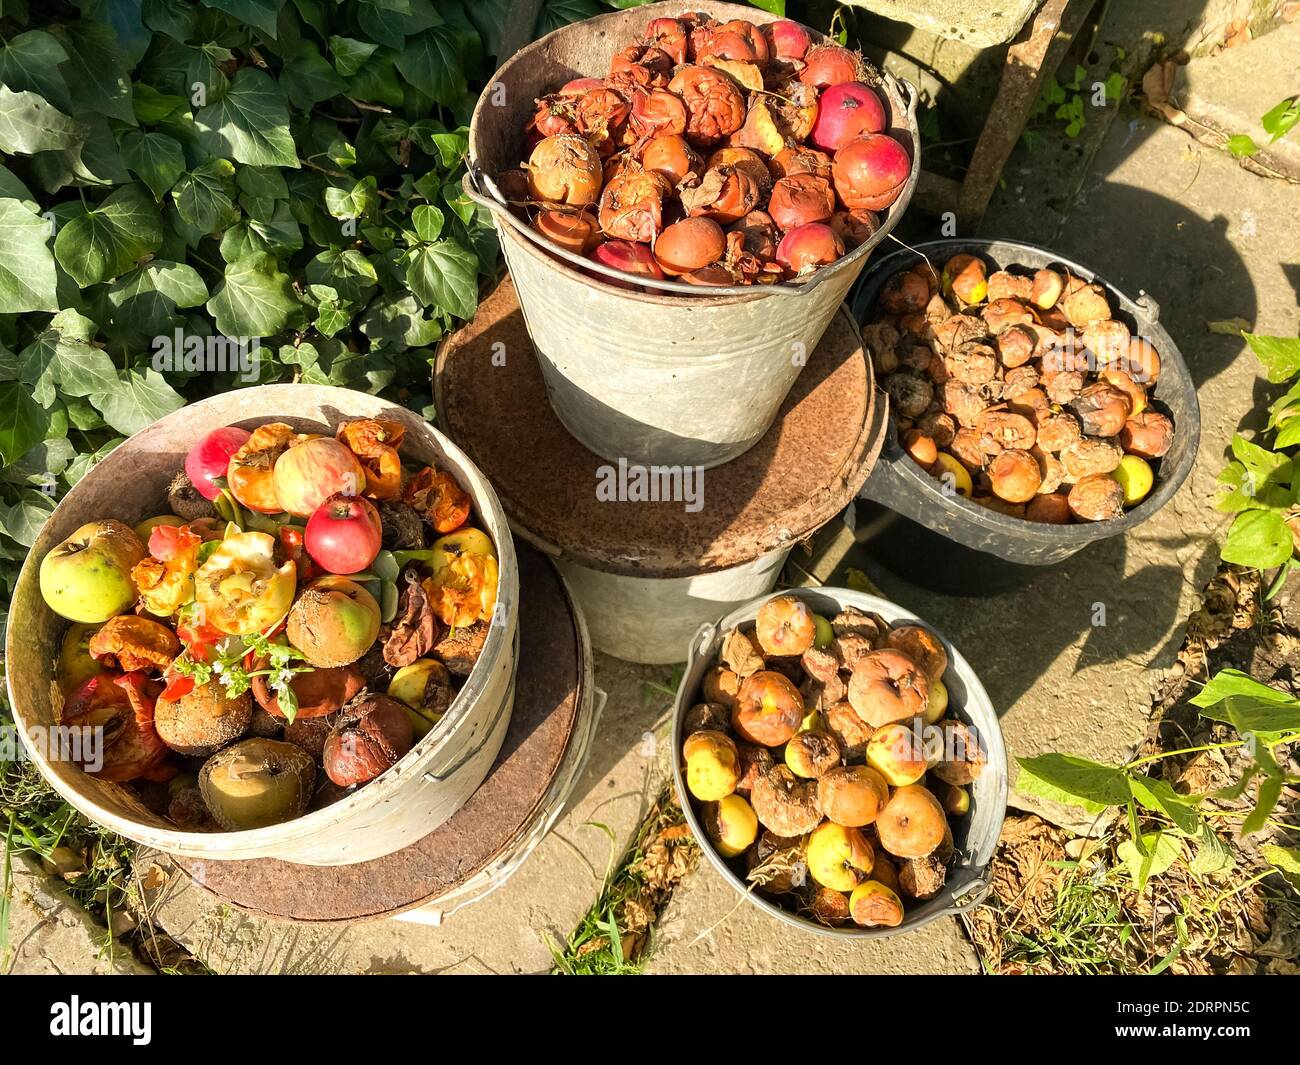 Organic biodegradable waste containers with food waste and vegetable leftovers, garden compost pit for making compost. Composting at home concept Stock Photo